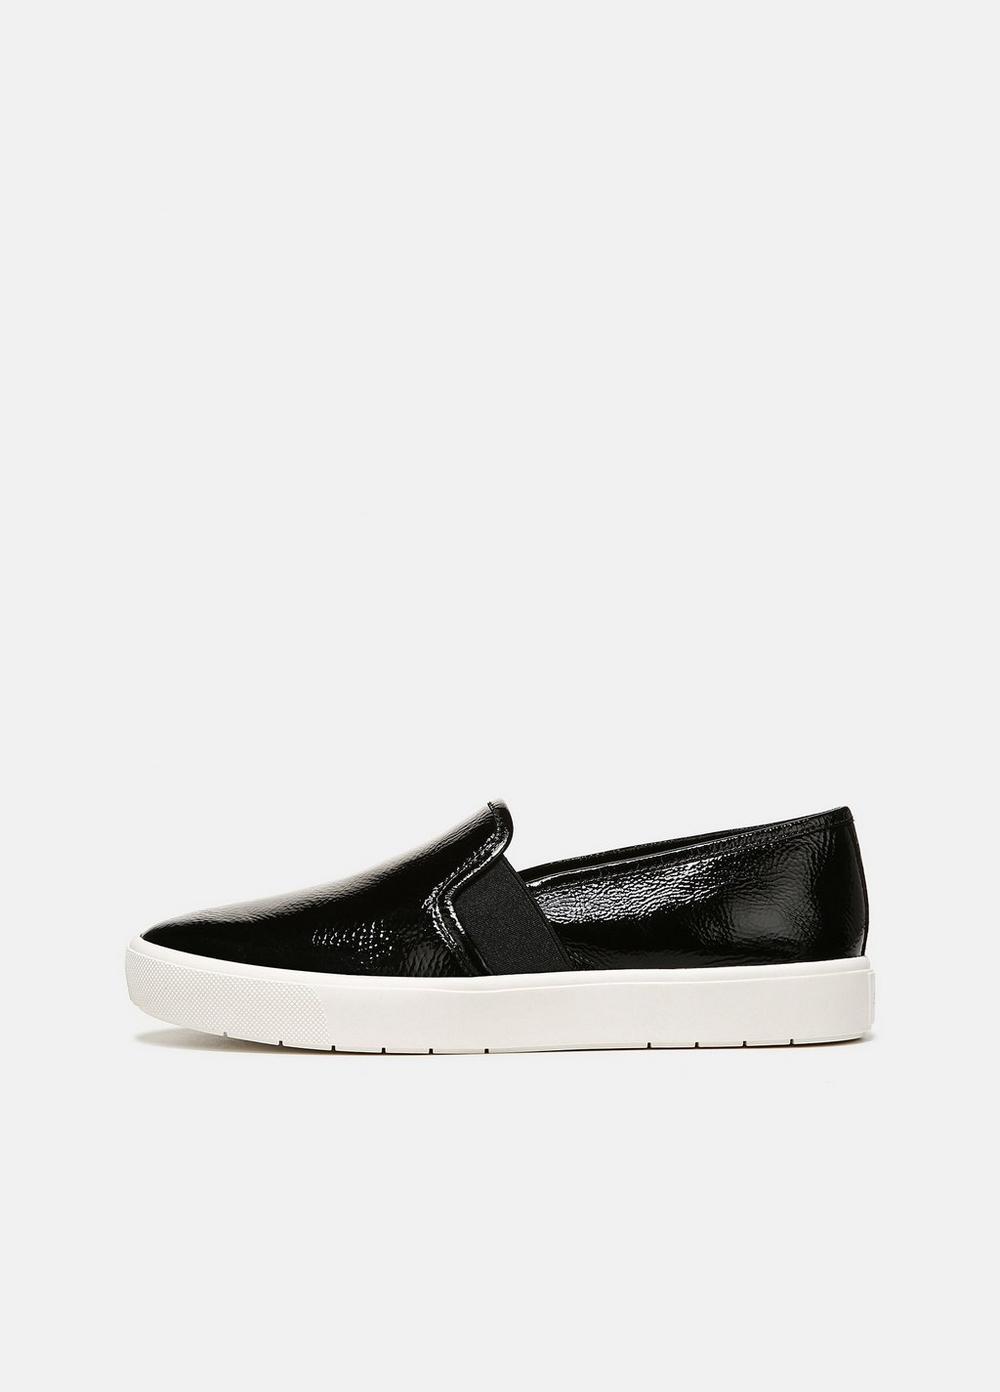 Blair Patent Leather Sneaker in Shoes | Vince